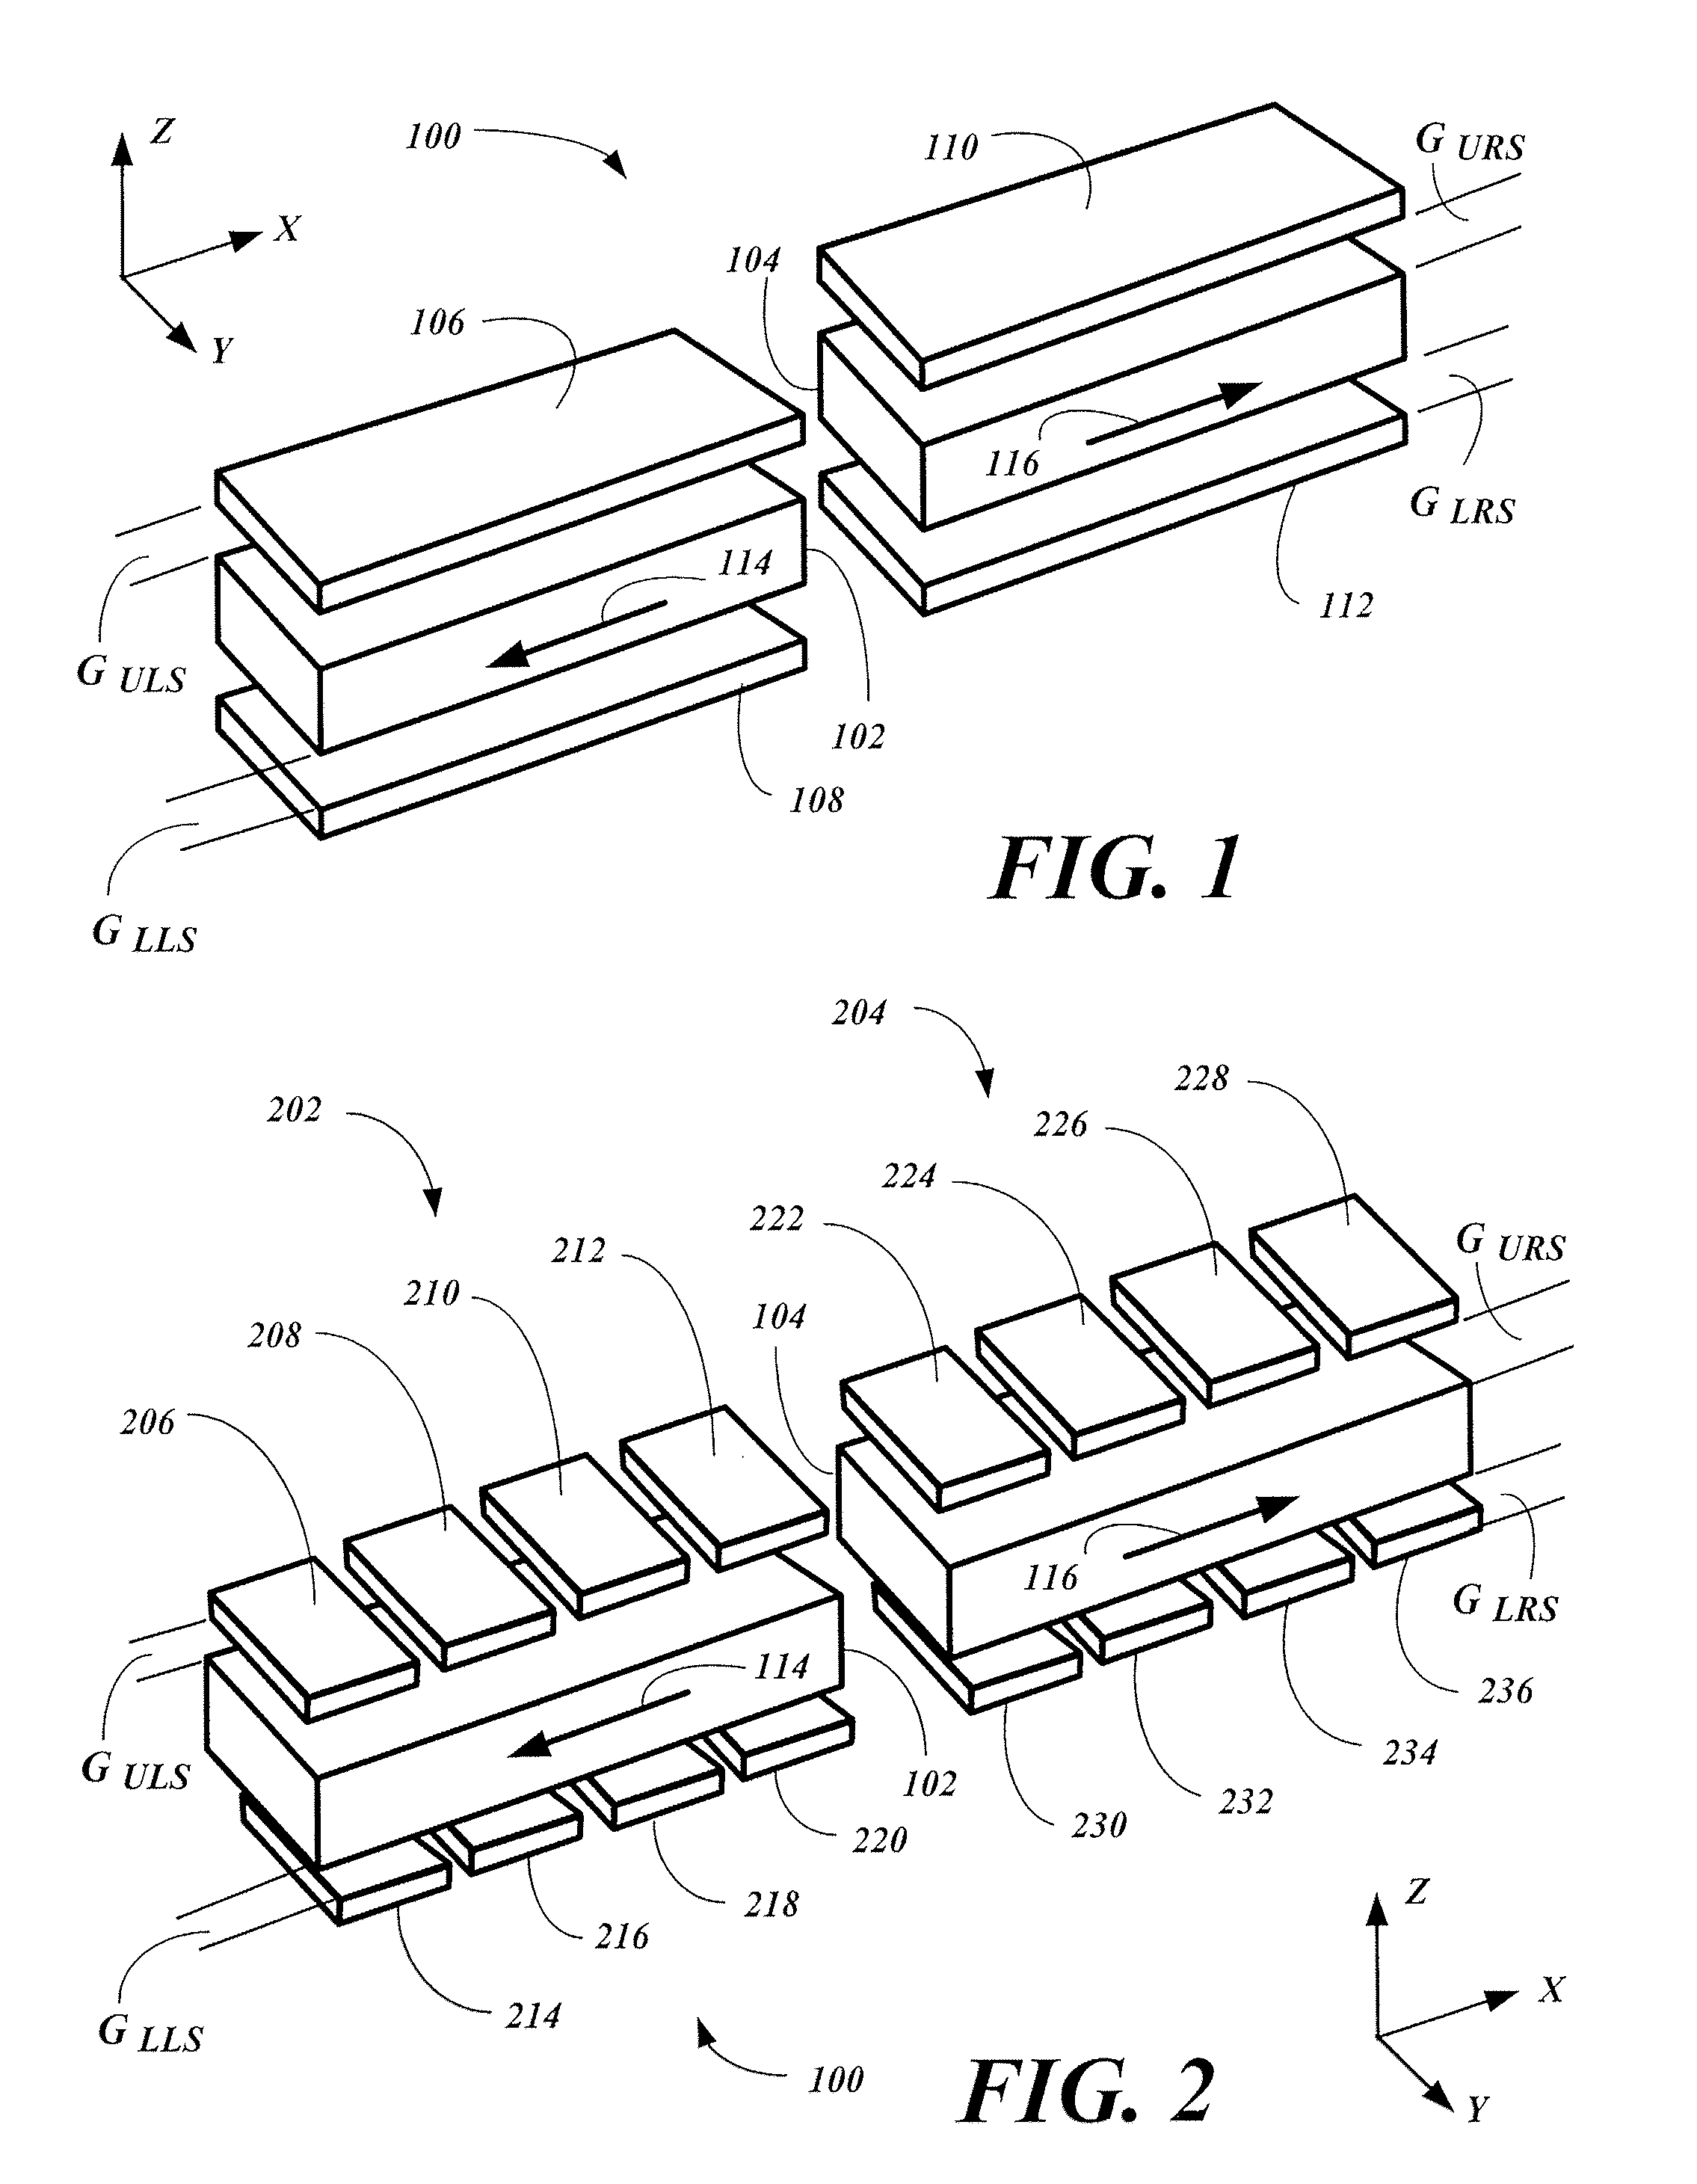 Systems and methods for acceleration and rotational determination from an out-of-plane MEMS device